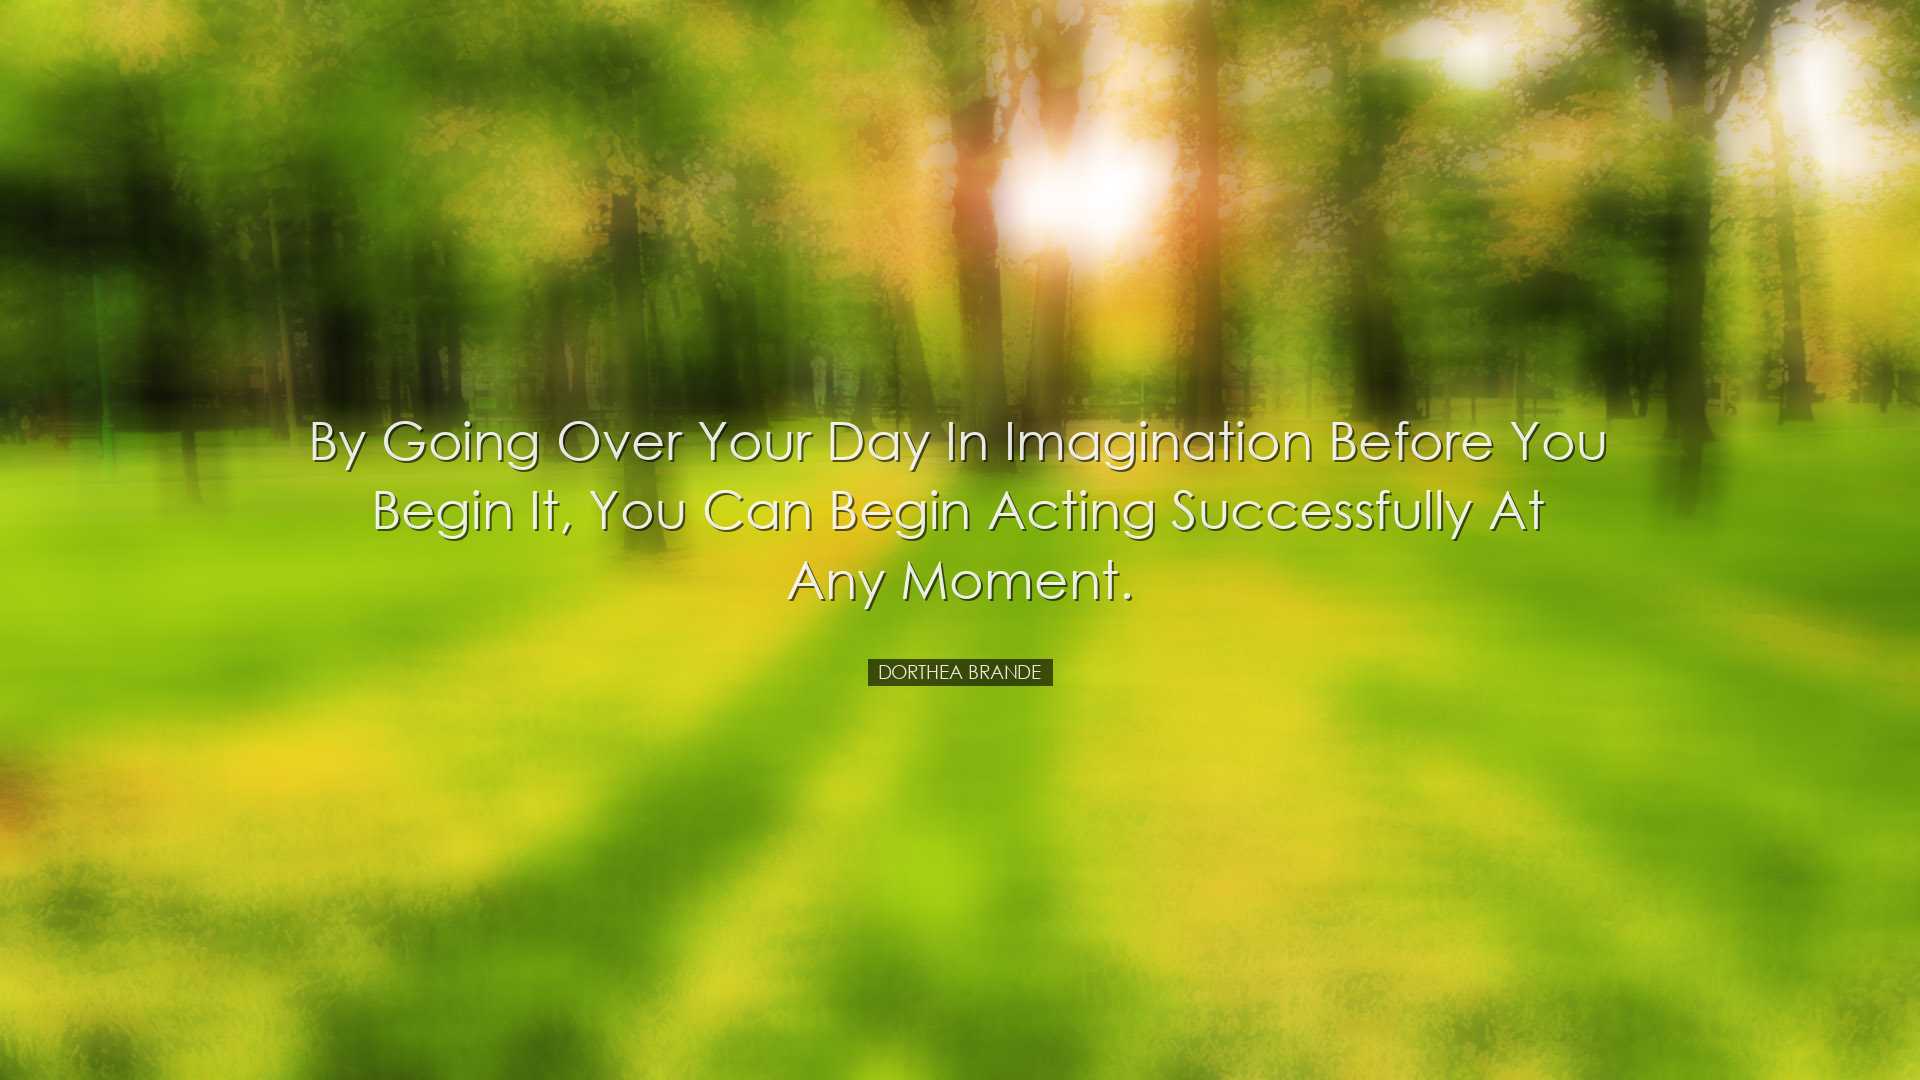 By going over your day in imagination before you begin it, you can